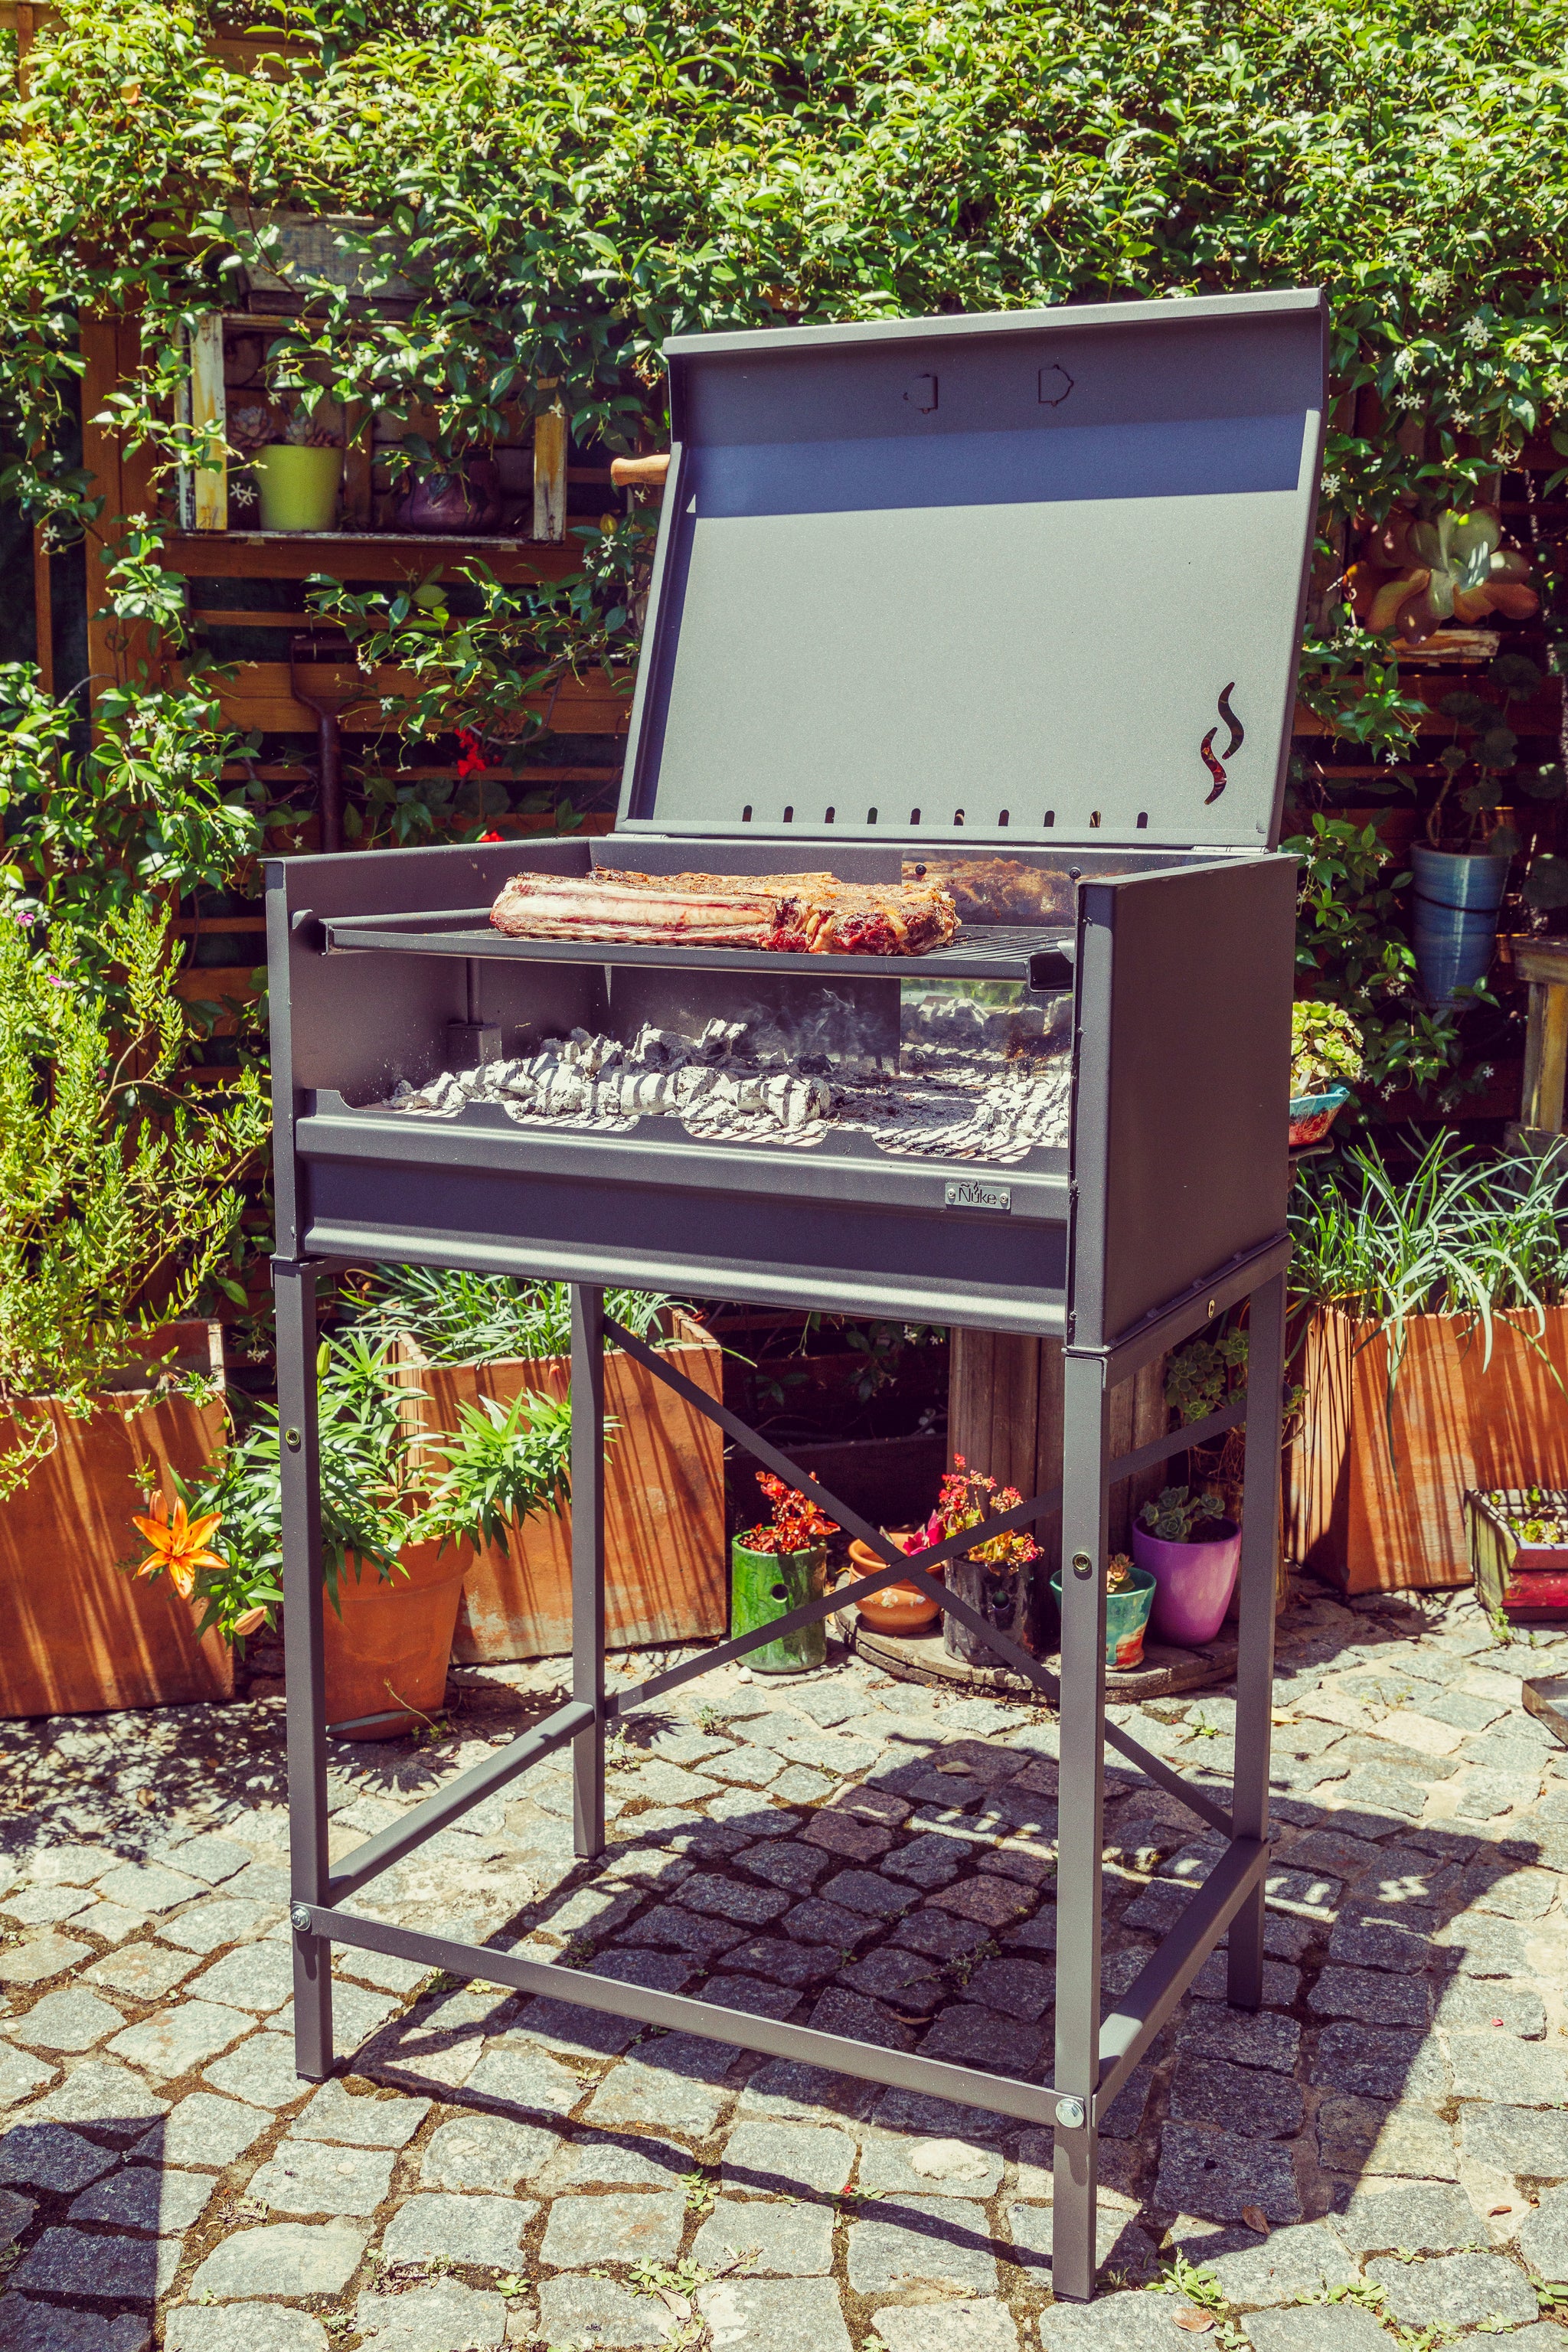 Press Release: Ñuke Expands Line of Argentinian Gaucho Grills with the Release of the Pampa